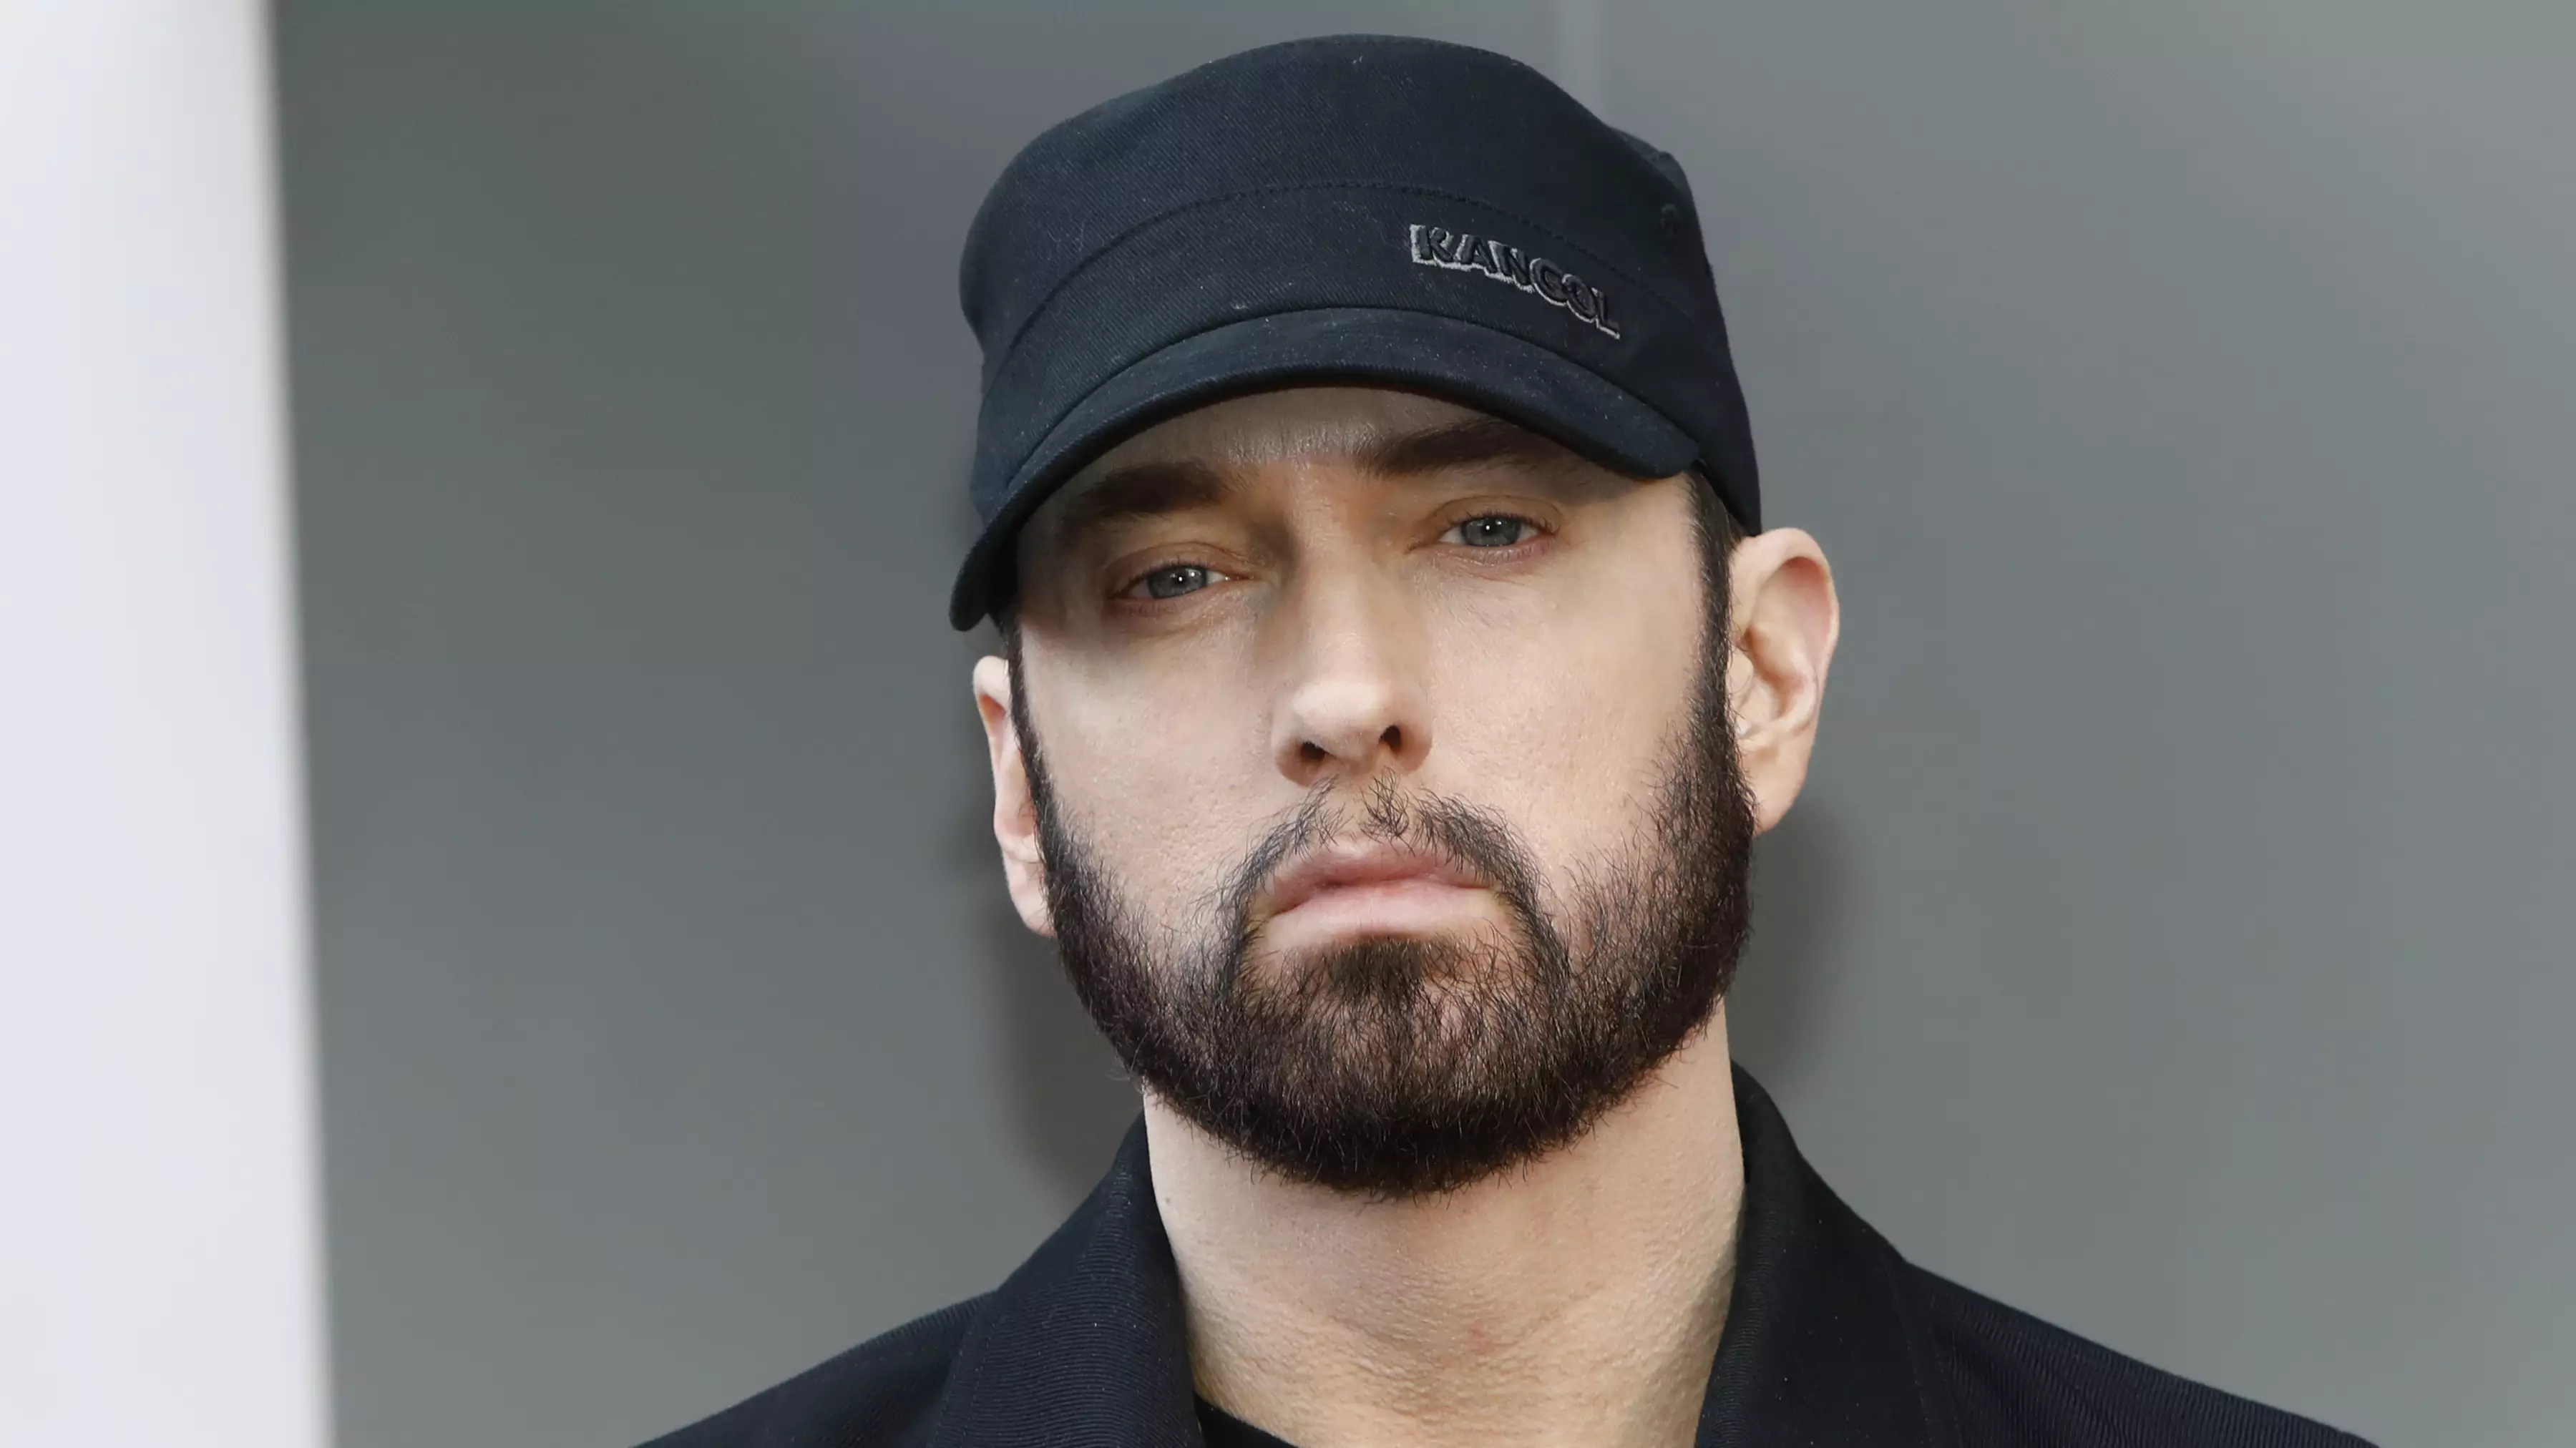 Man Accused Of Breaking Into Eminem's Home And Threatening To Kill Him 